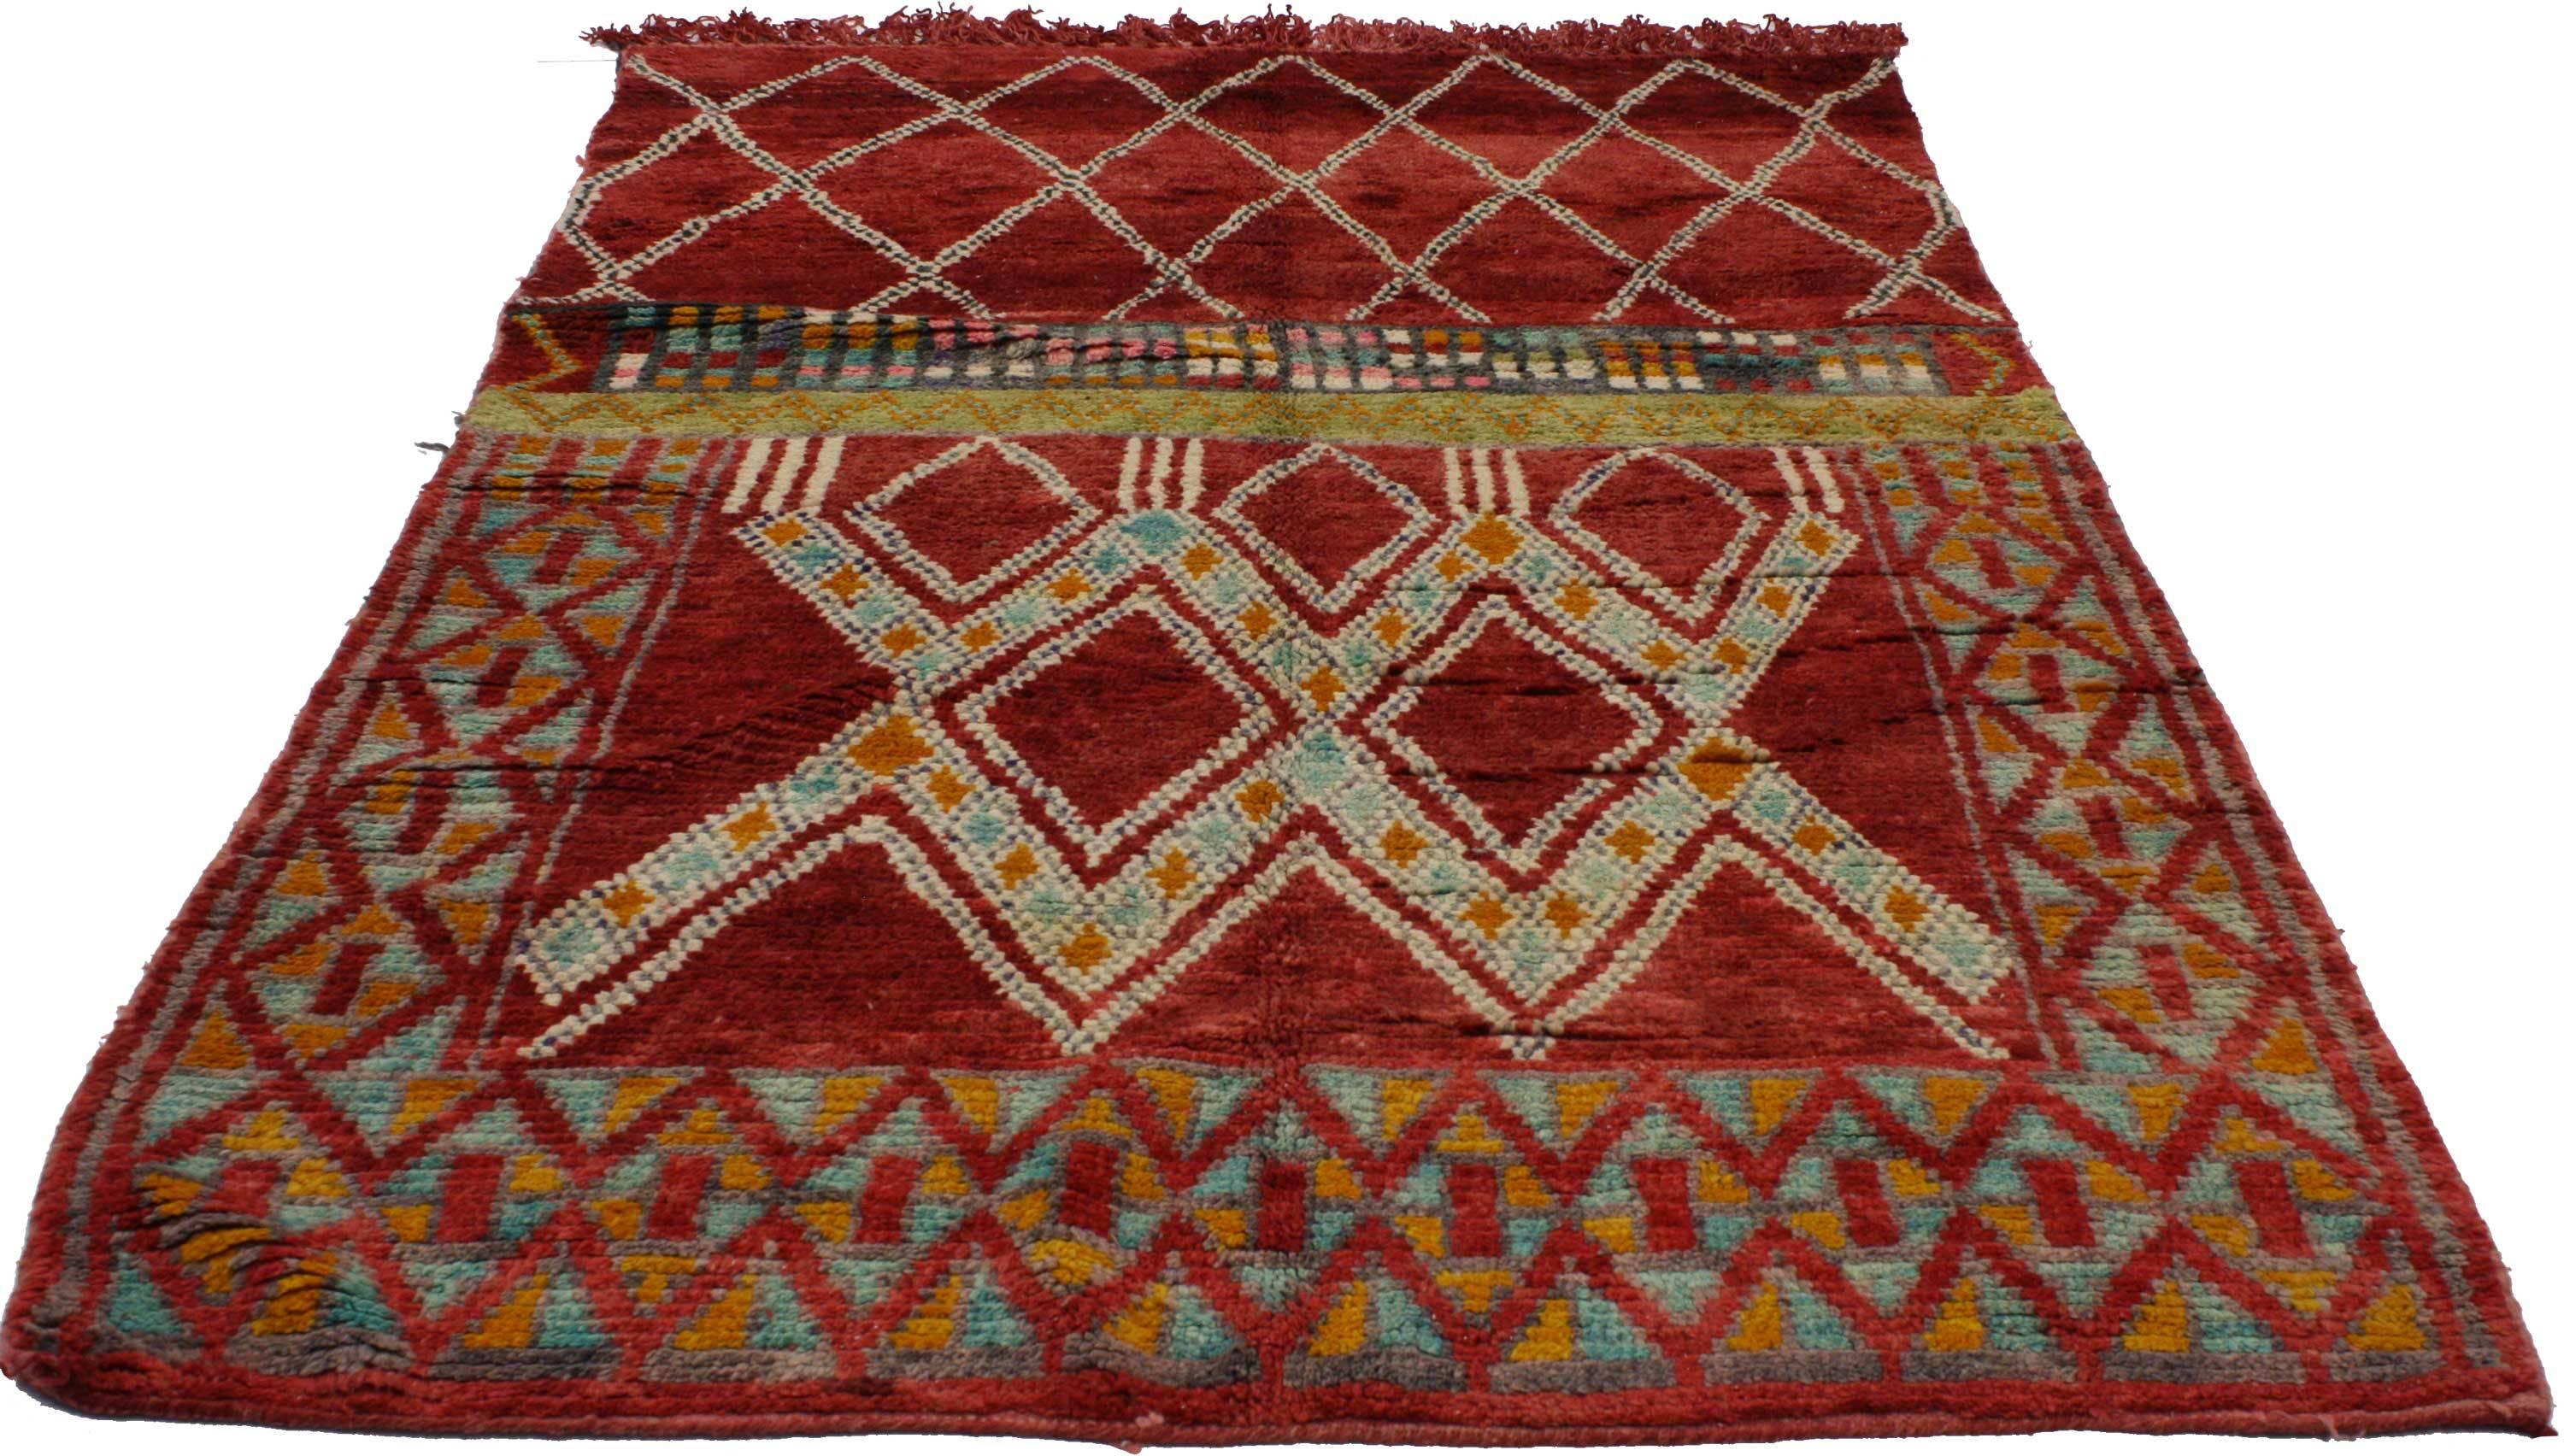 Moroccan rugs are notable for their dynamic colorful designs and for their strong sense of geometric structure. This Mid-Century Modern Moroccan rug features an array of vibrant colors that contrast beautifully on an energetic red background. With